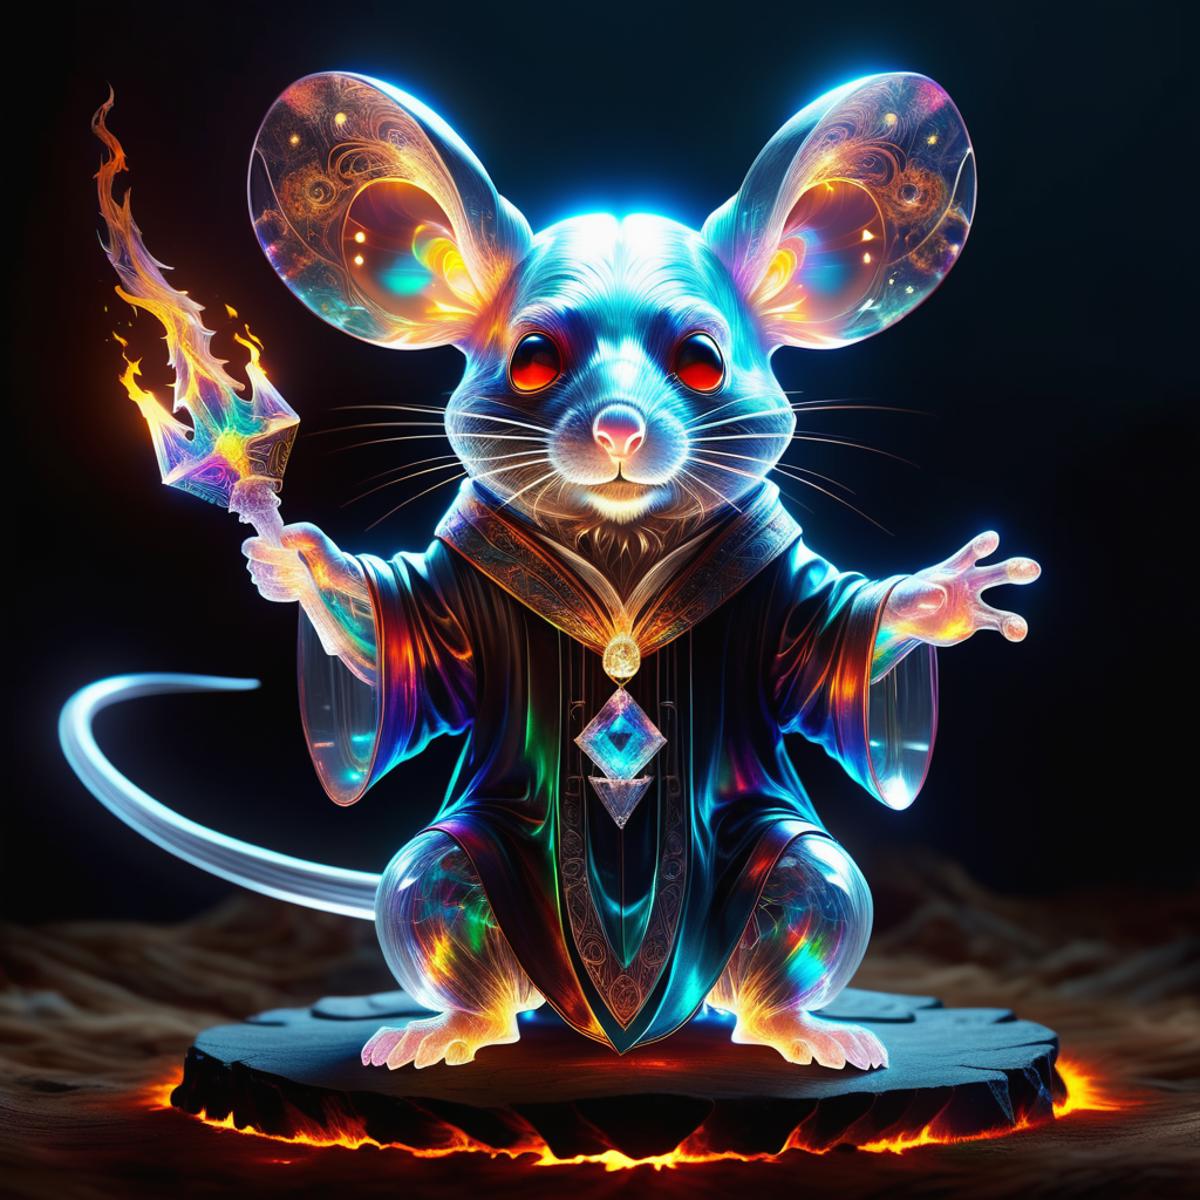 A light blue mouse wearing a black robe with a gemstone, holding a wand.